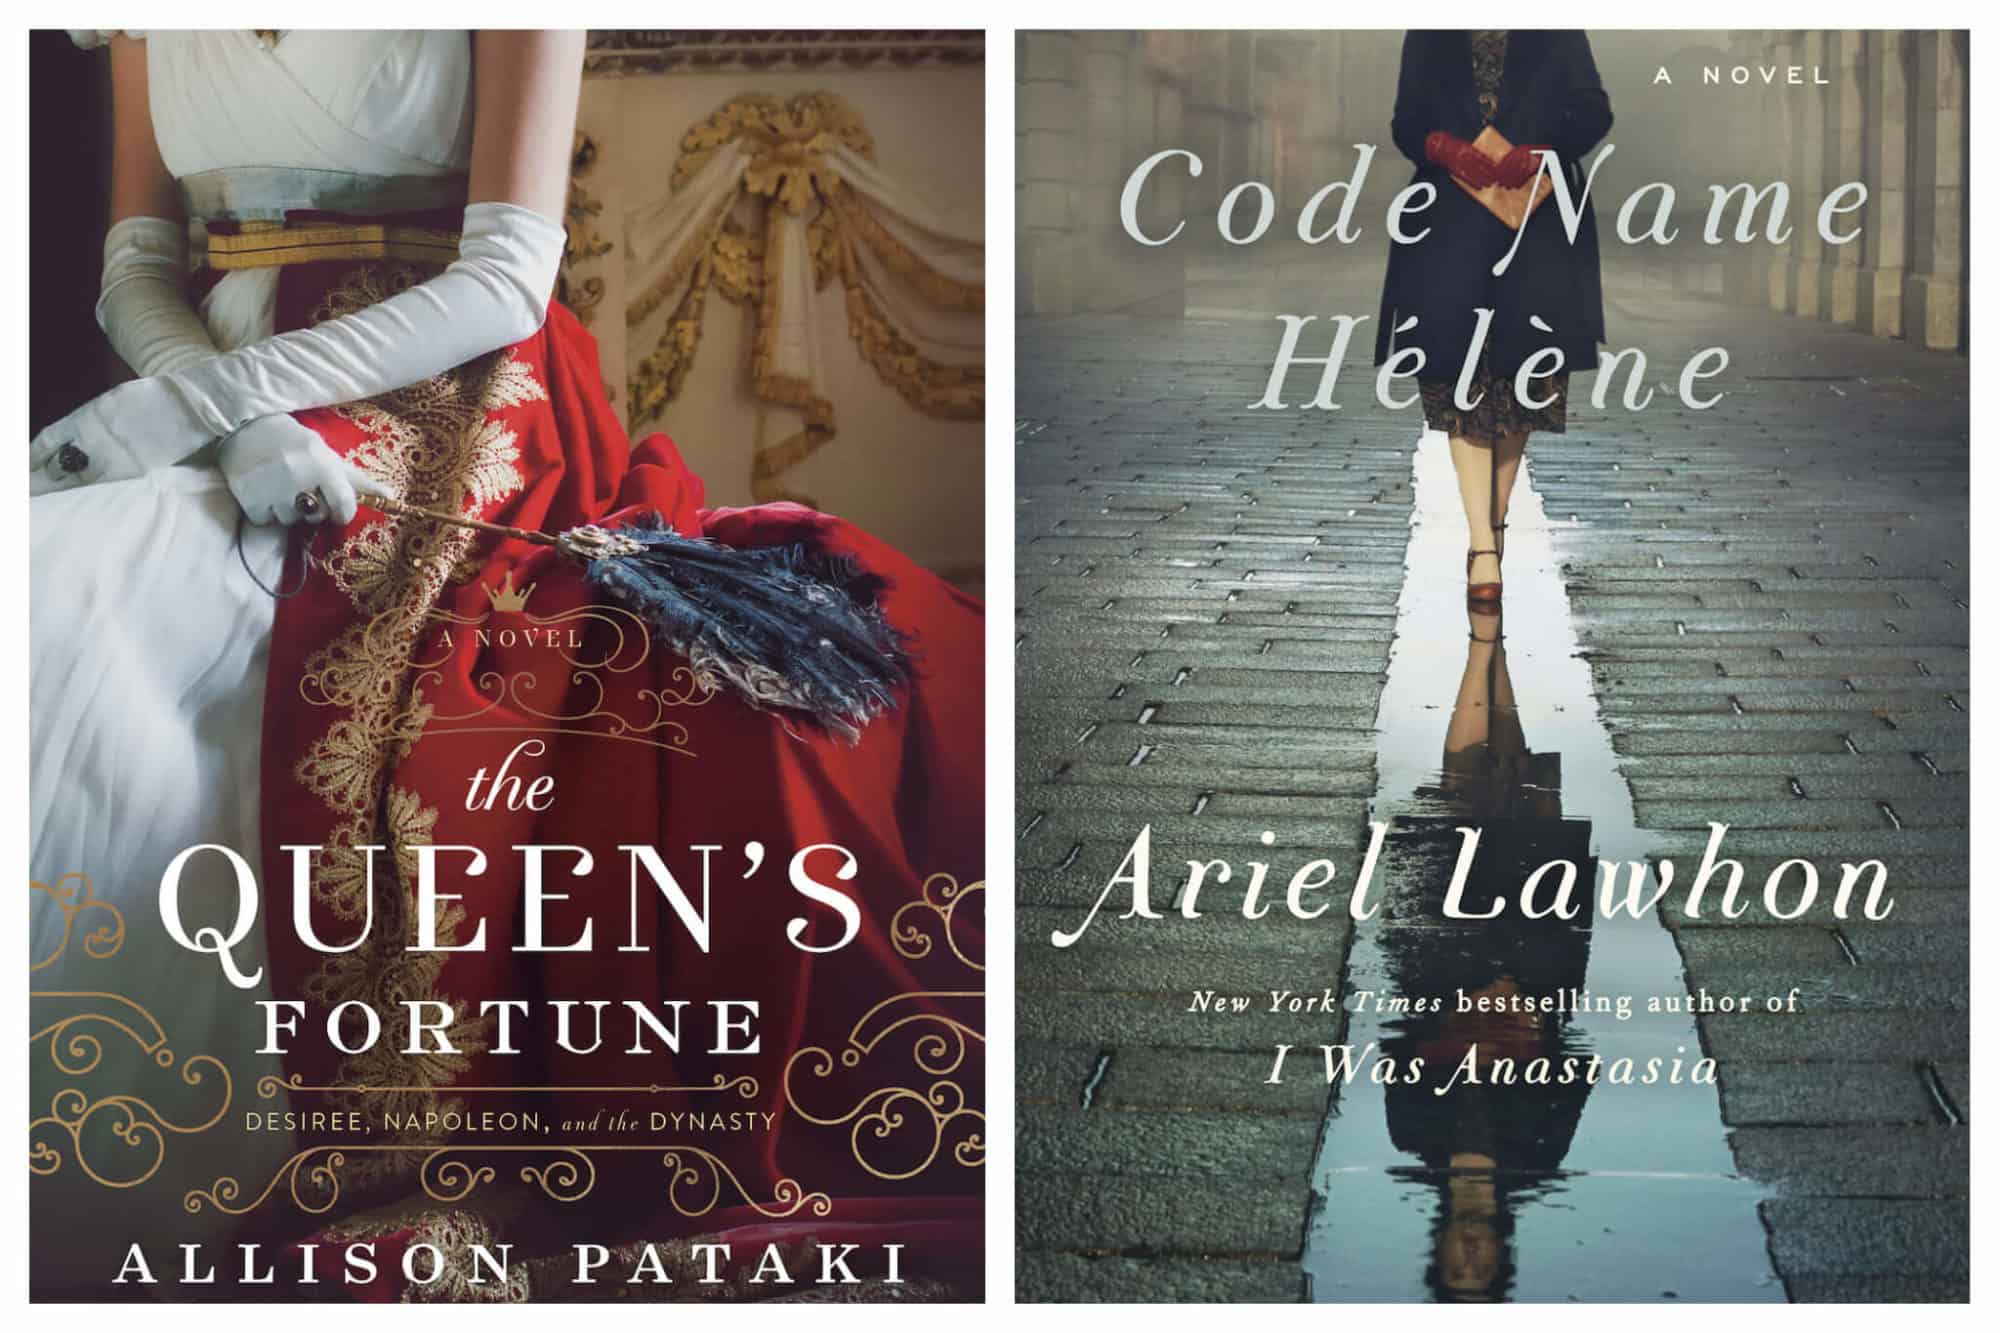 Left: Cover of The Queen's fortune by Allison Pataki
Right: Cover of Code Name Hélène by Ariel Lawhon